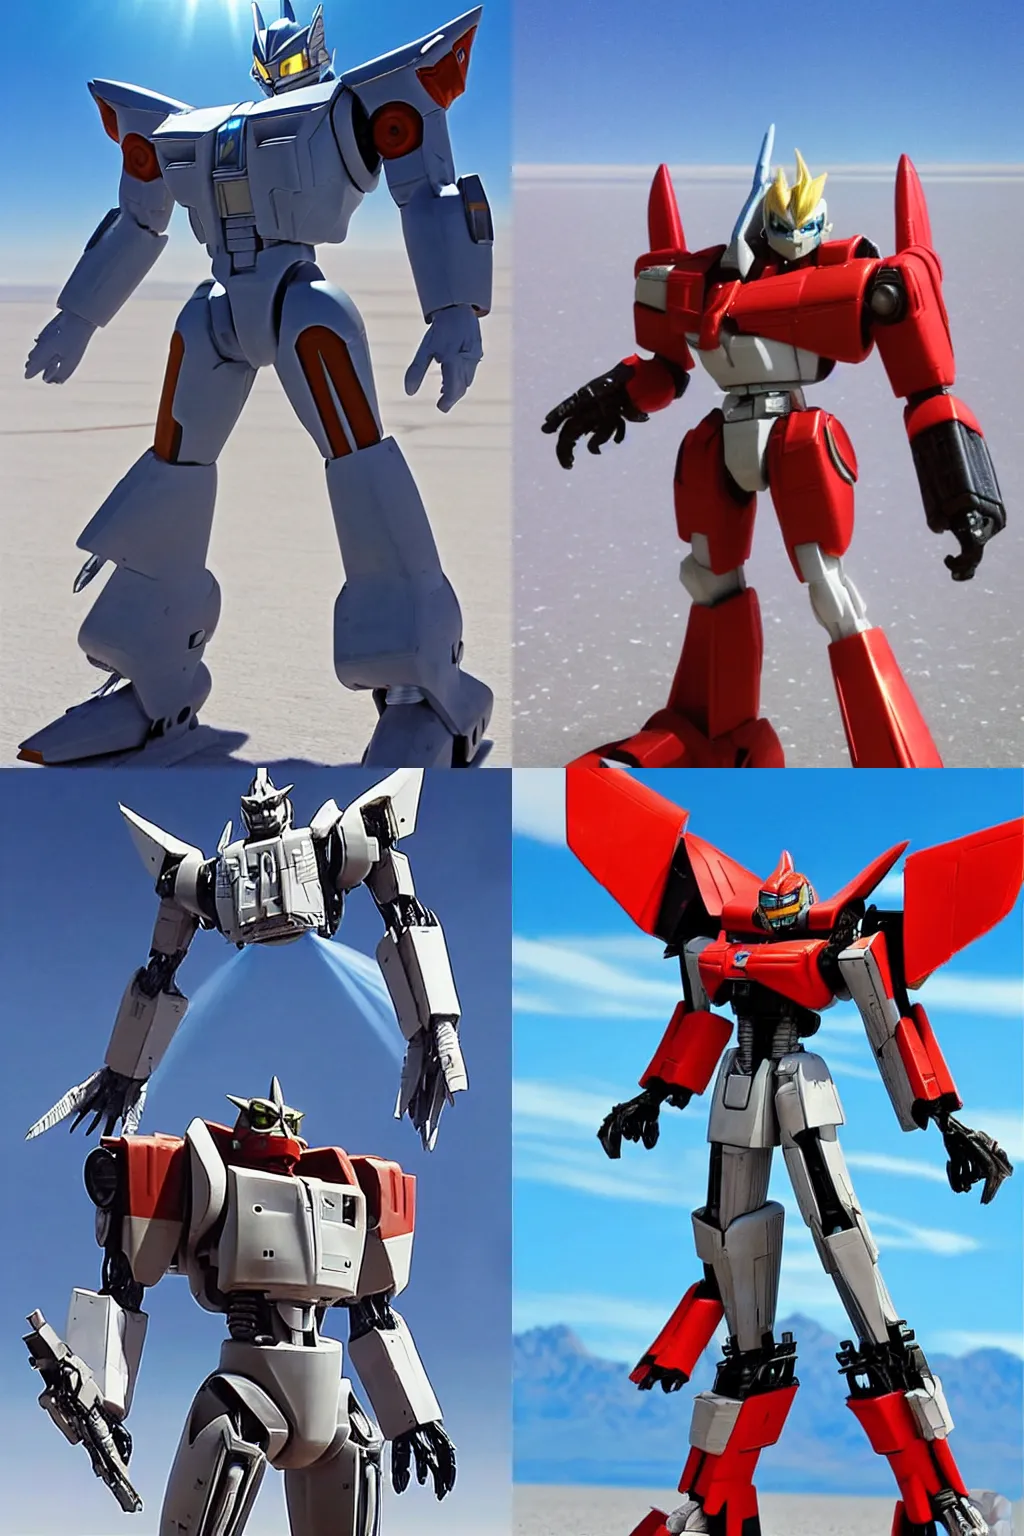 Prompt: Character Portrait of Jetfire from Transformers on a clear sunny day with a blue sky standing in the bonneville salt flats, Jetfire!!!!!, Jet parts, Intricate, Highly Detailed, Transformers!!!!!!!!!!!!!, Skyfire, Battroid Mode, Zone of Enders, Genesis of Aquarion, Aquarion, Anime Robots, Mecha Anime, Anime, Robots, Robot, Robot Mode, 8k, ultra realistic, illustration, splash art, rule of thirds, good value control, Ken Ishikawa